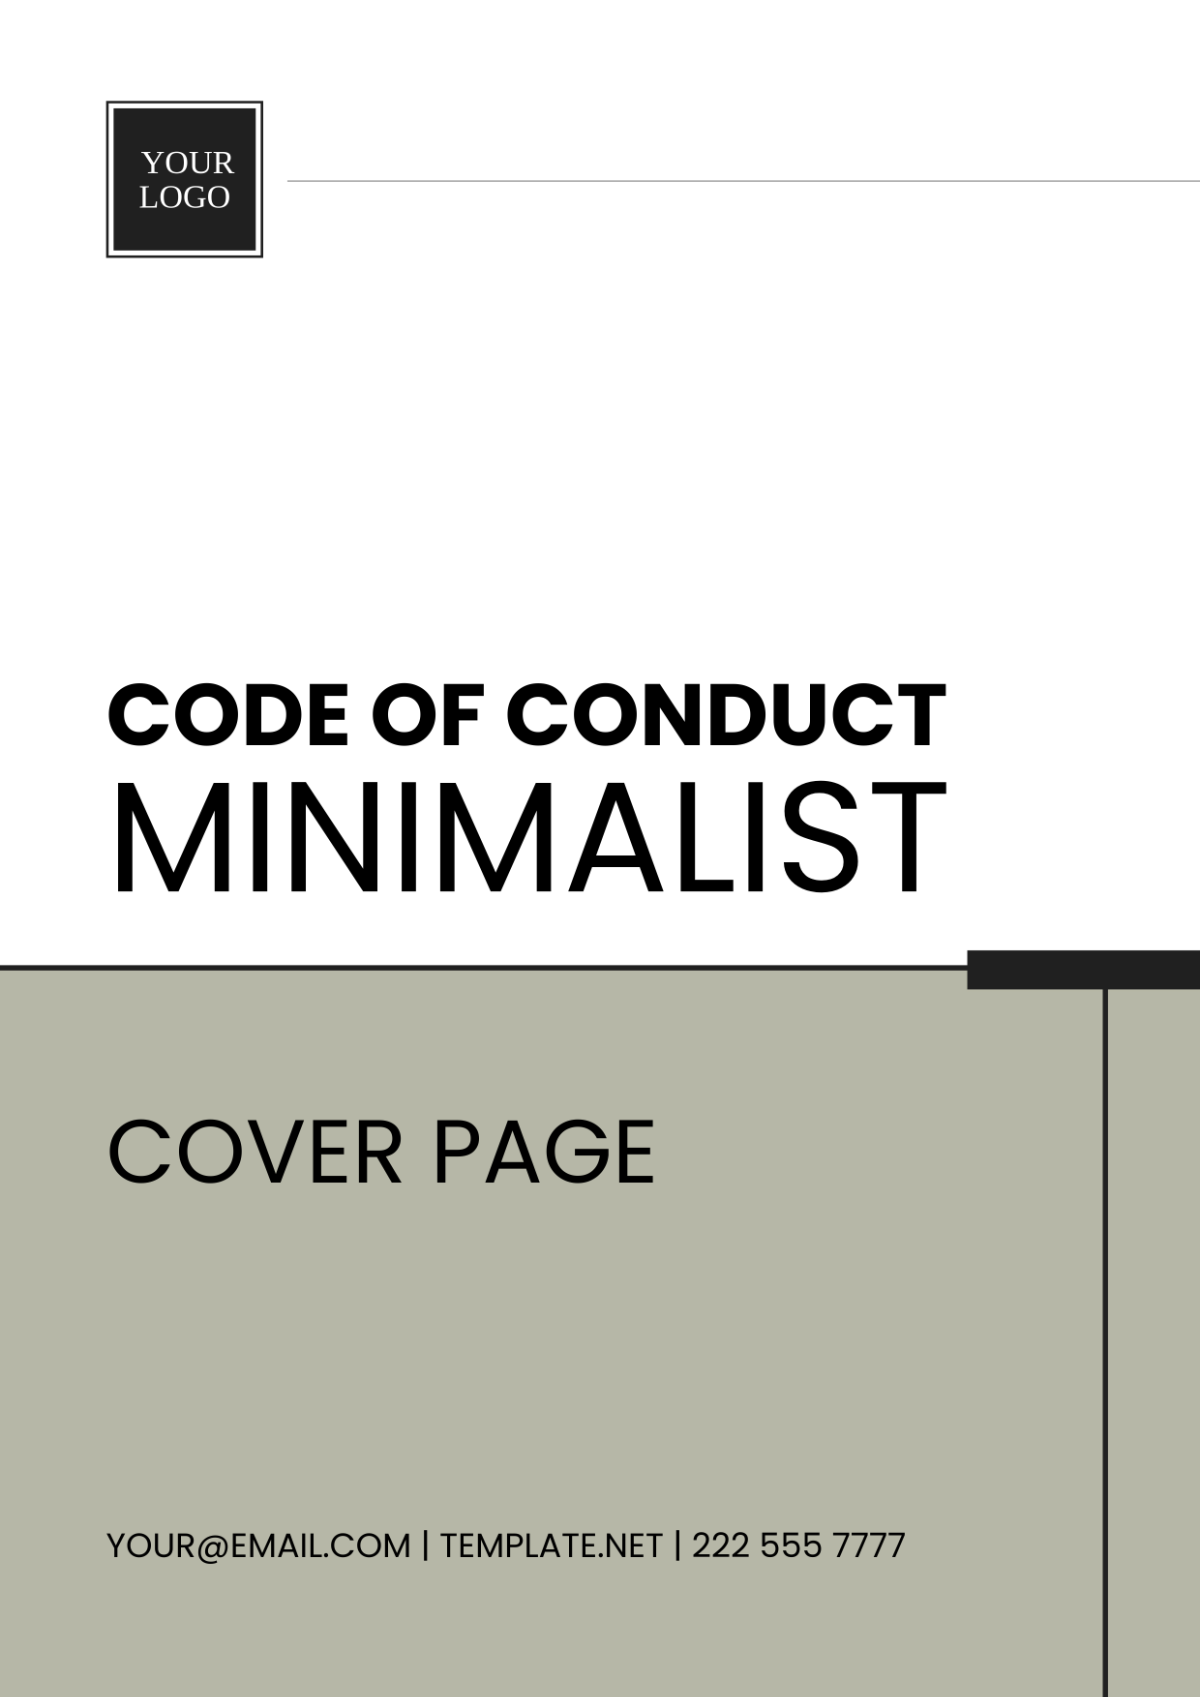 Code of Conduct Minimalist Cover Page